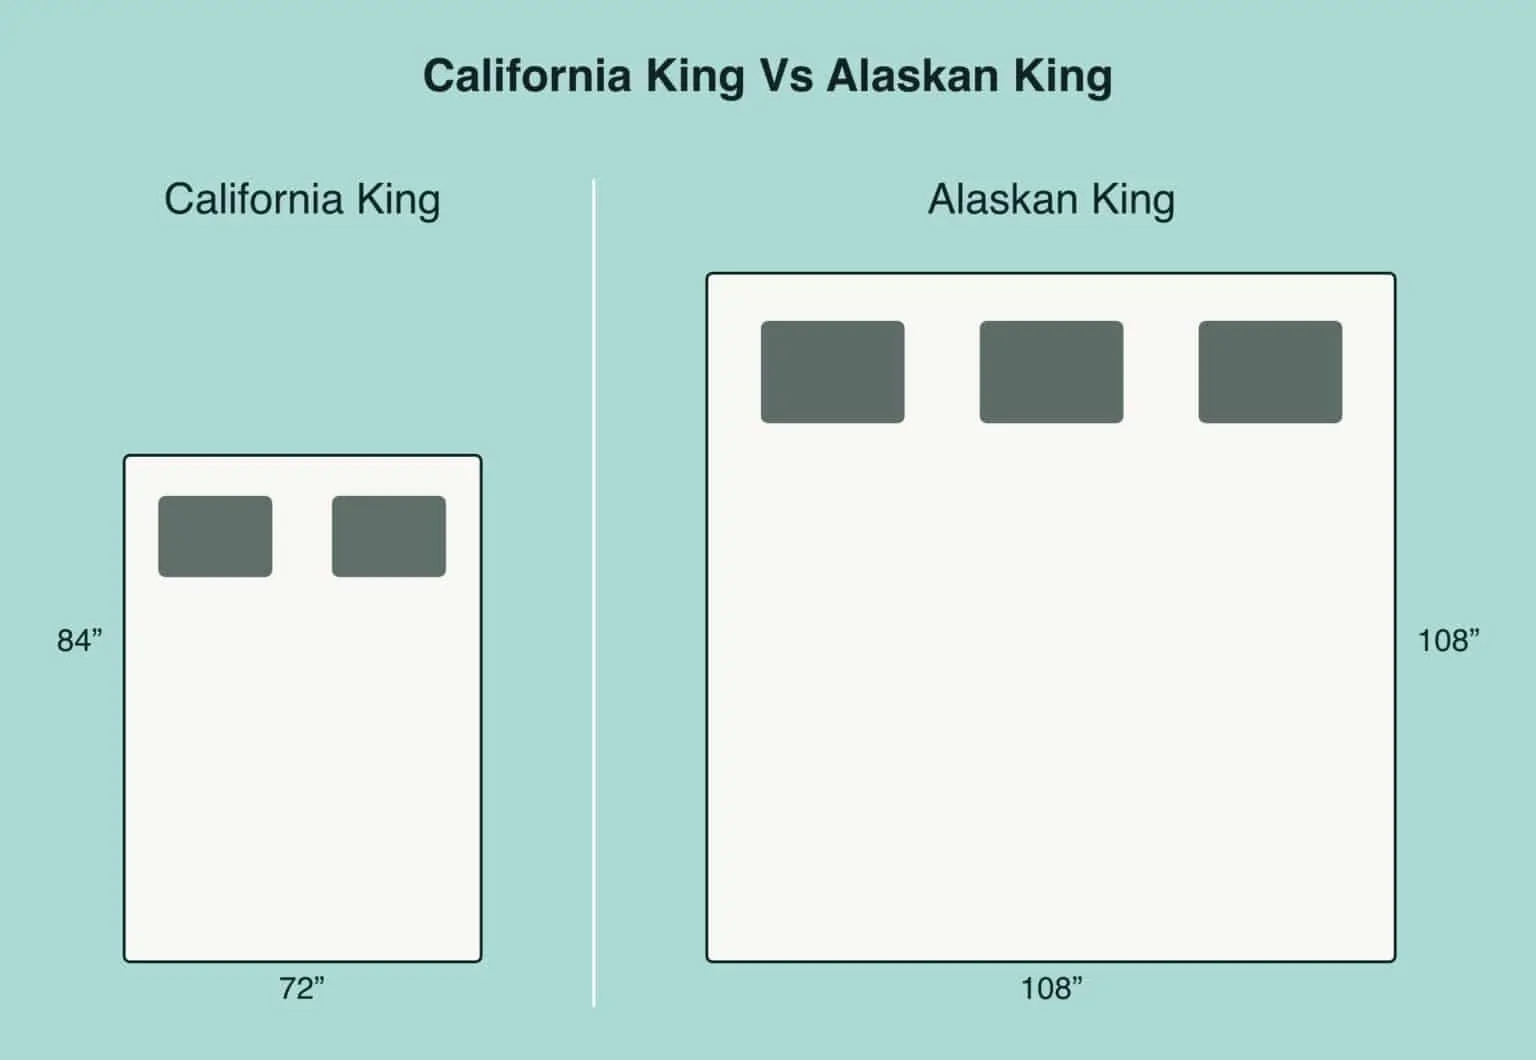 California King vs Alaskan King: What is the Difference?